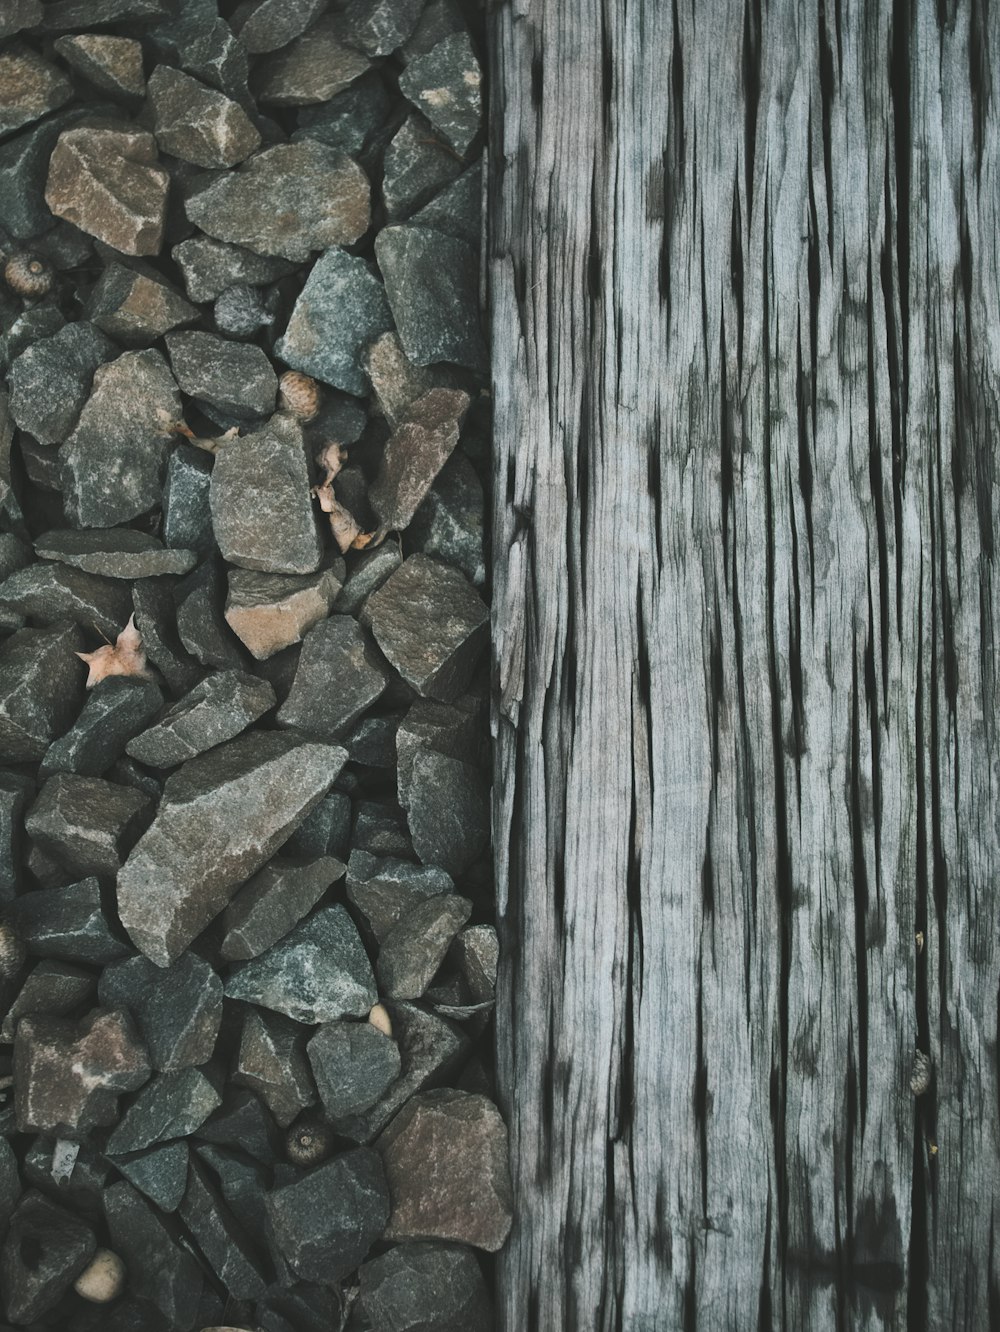 a close up of rocks near a wooden post